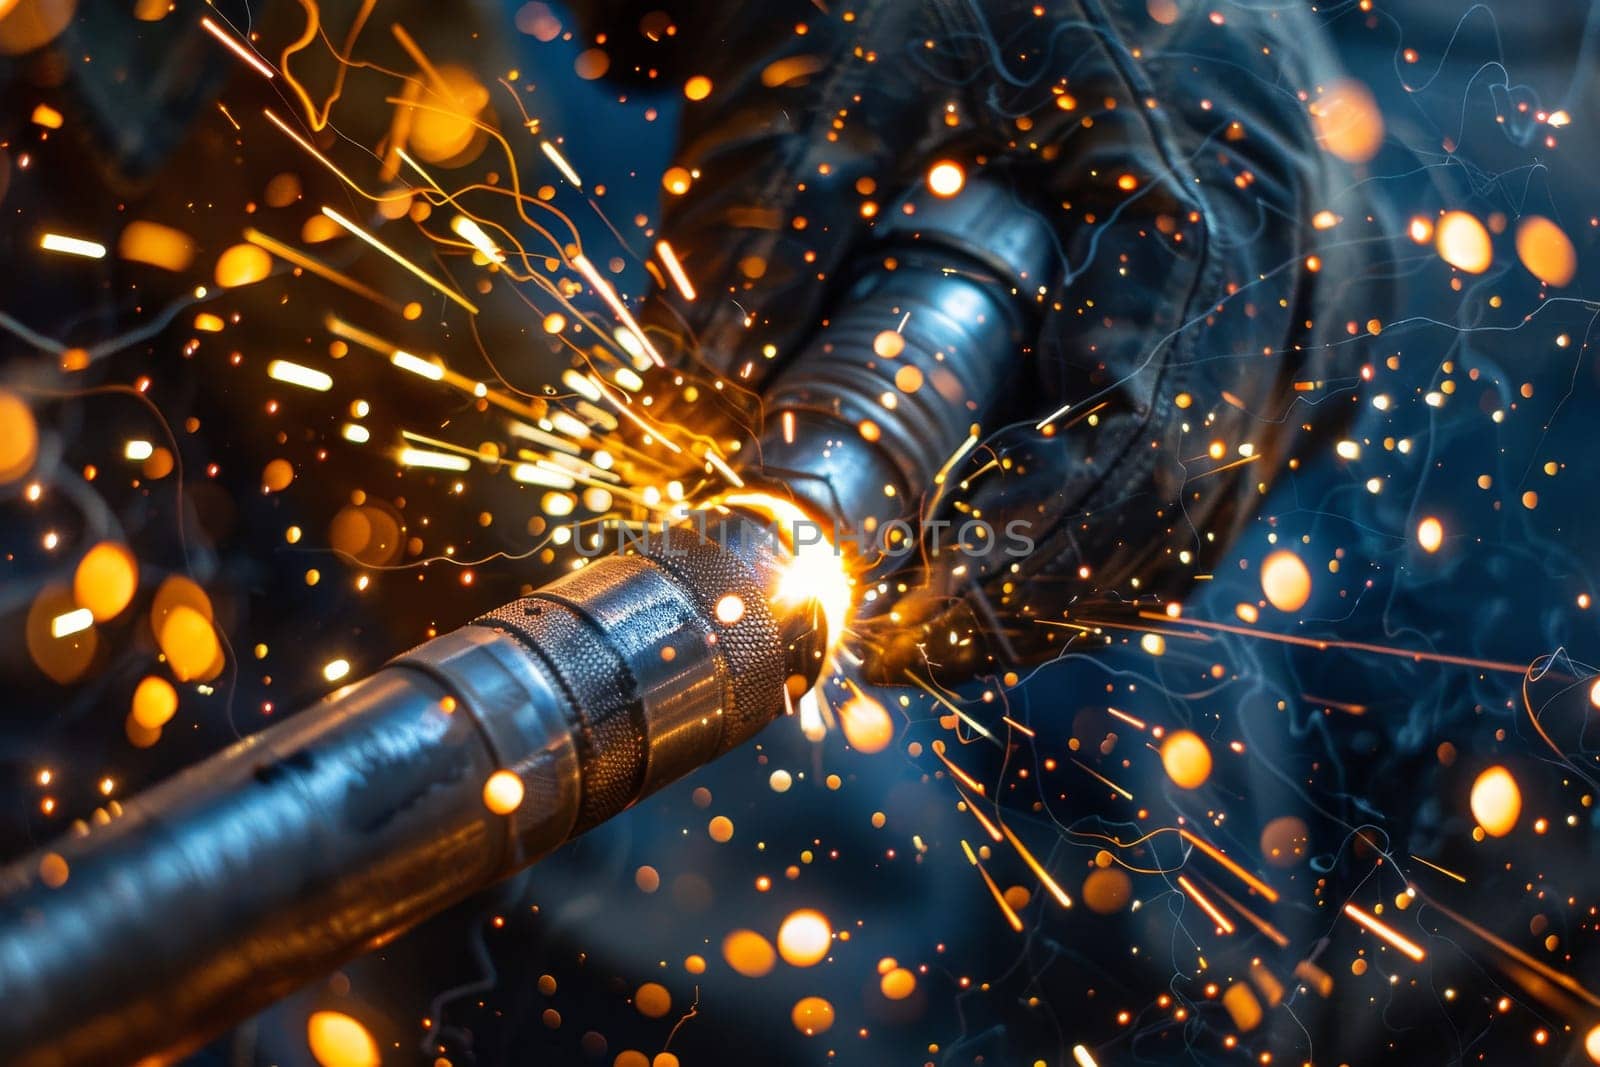 A piece of machinery is being welded, with sparks flying out of it. Concept of danger and excitement, as the sparks and heat from the welding process create a dramatic and intense scene